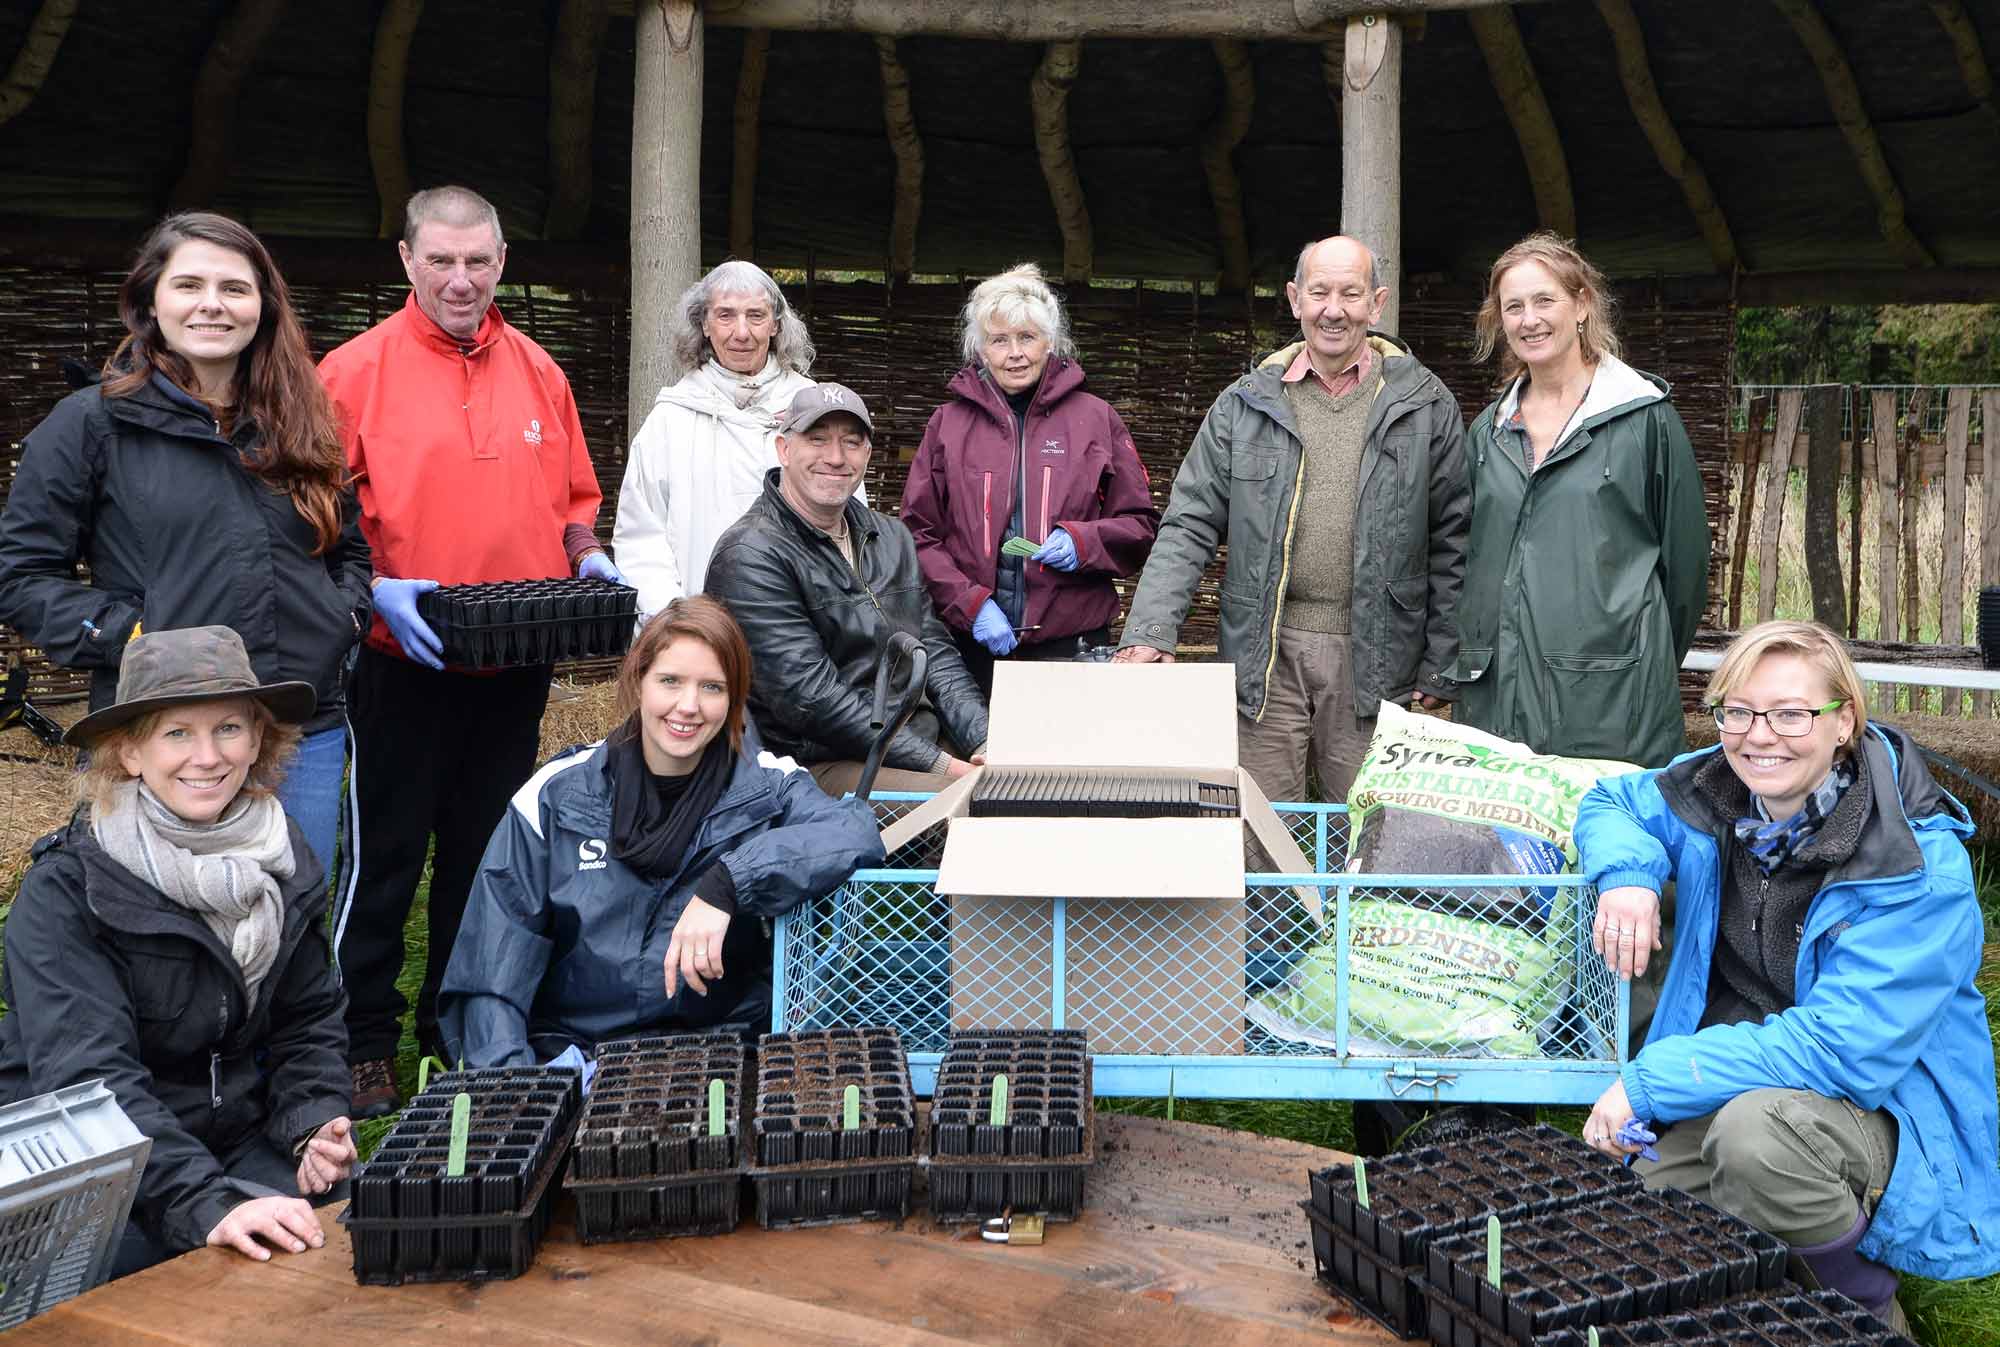 The Hagge Woods Trust has paid tribute to the hard work of local volunteers and staff from Betty’s Tearooms this week at the Three Hagges Wood Meadow site at the Hollicarrs, between Escrick and Riccall